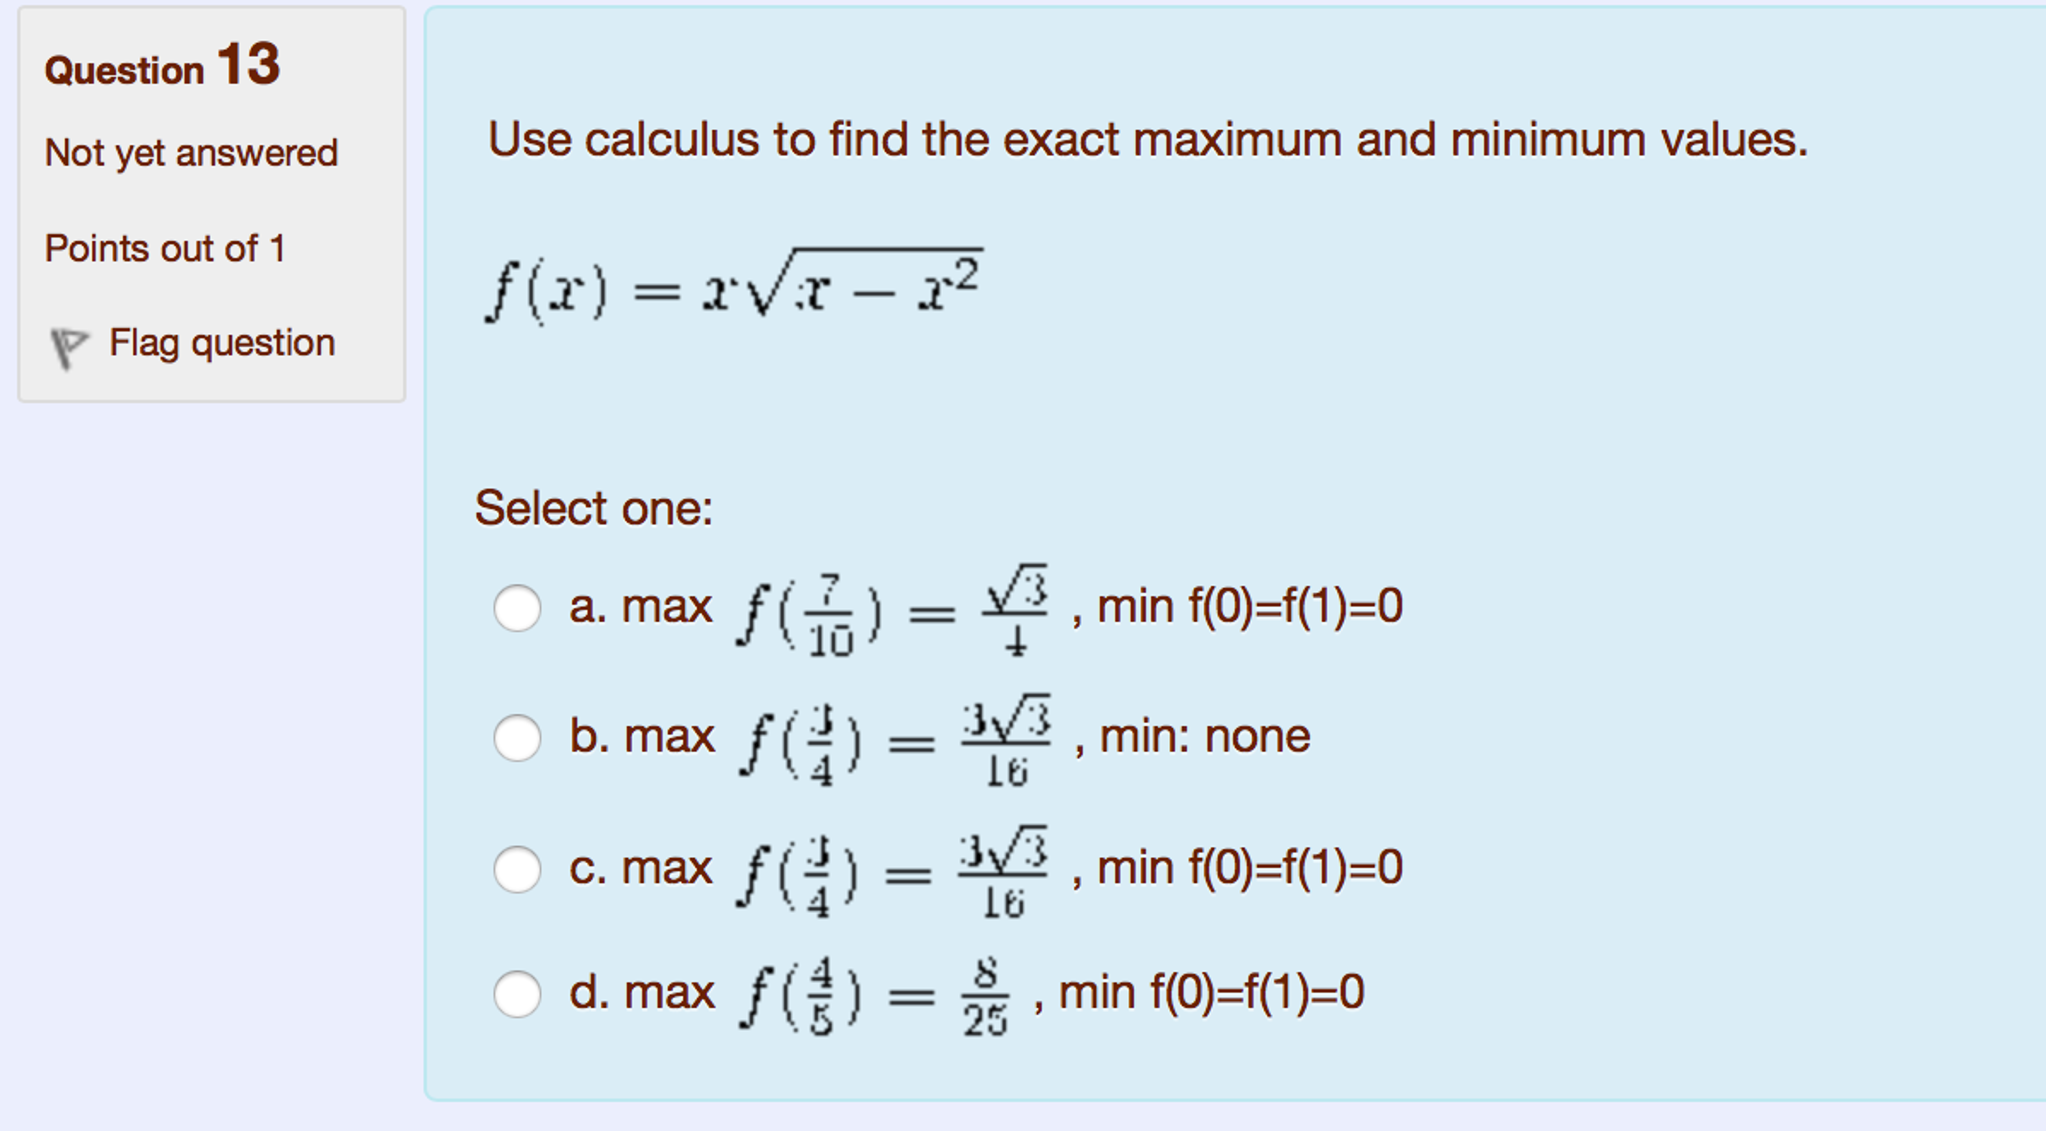 advanced calculus examples equal 10